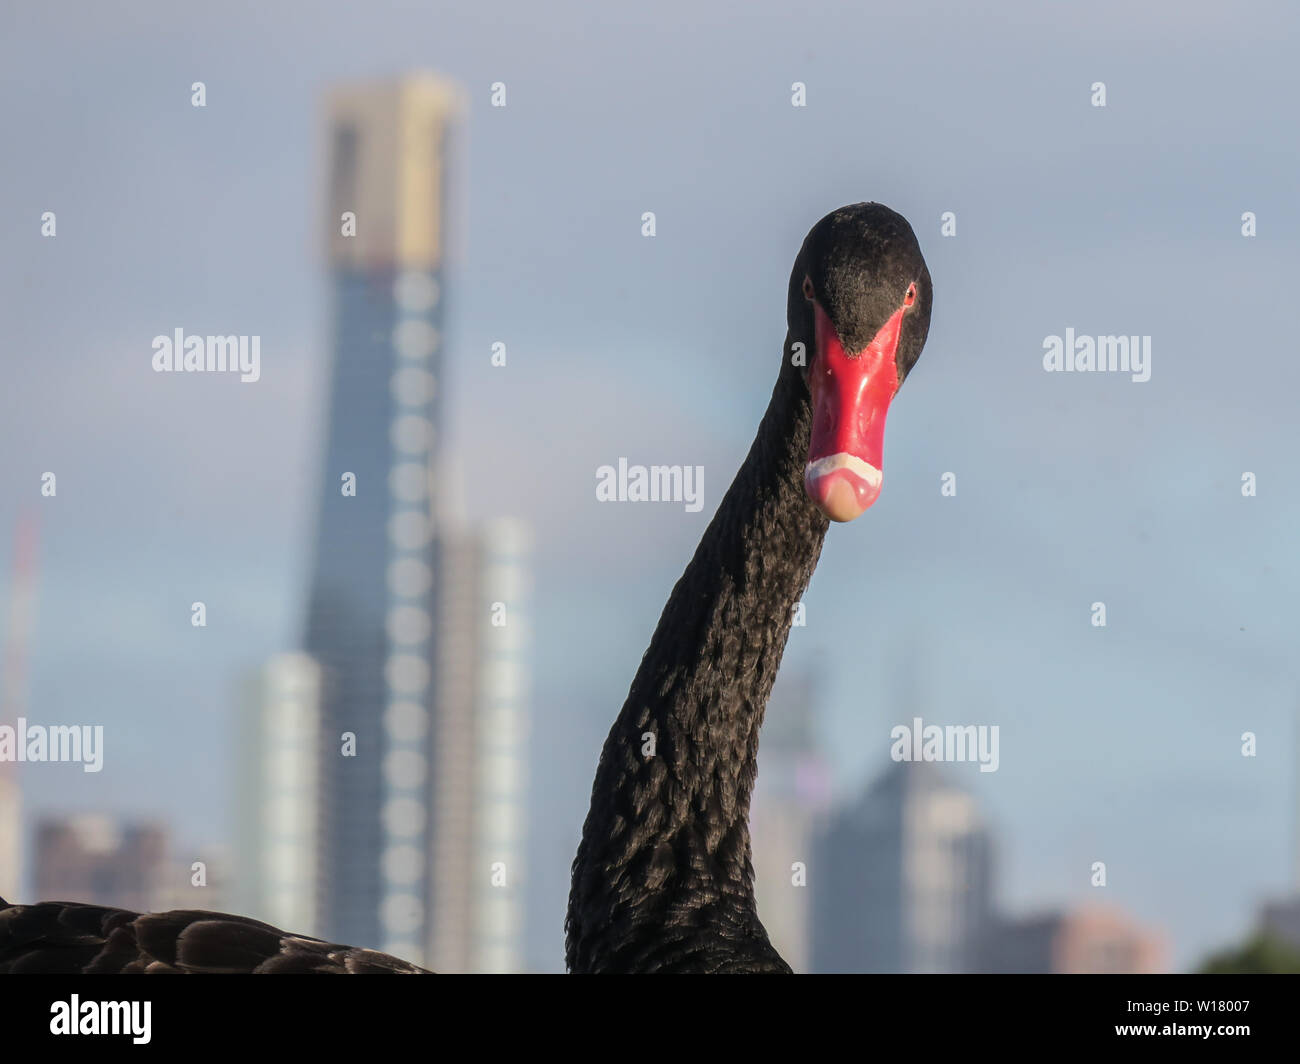 Birds of Melbourne. The long neck of a swan and the Eureka Tower on the Melbourne skyline. Stock Photo